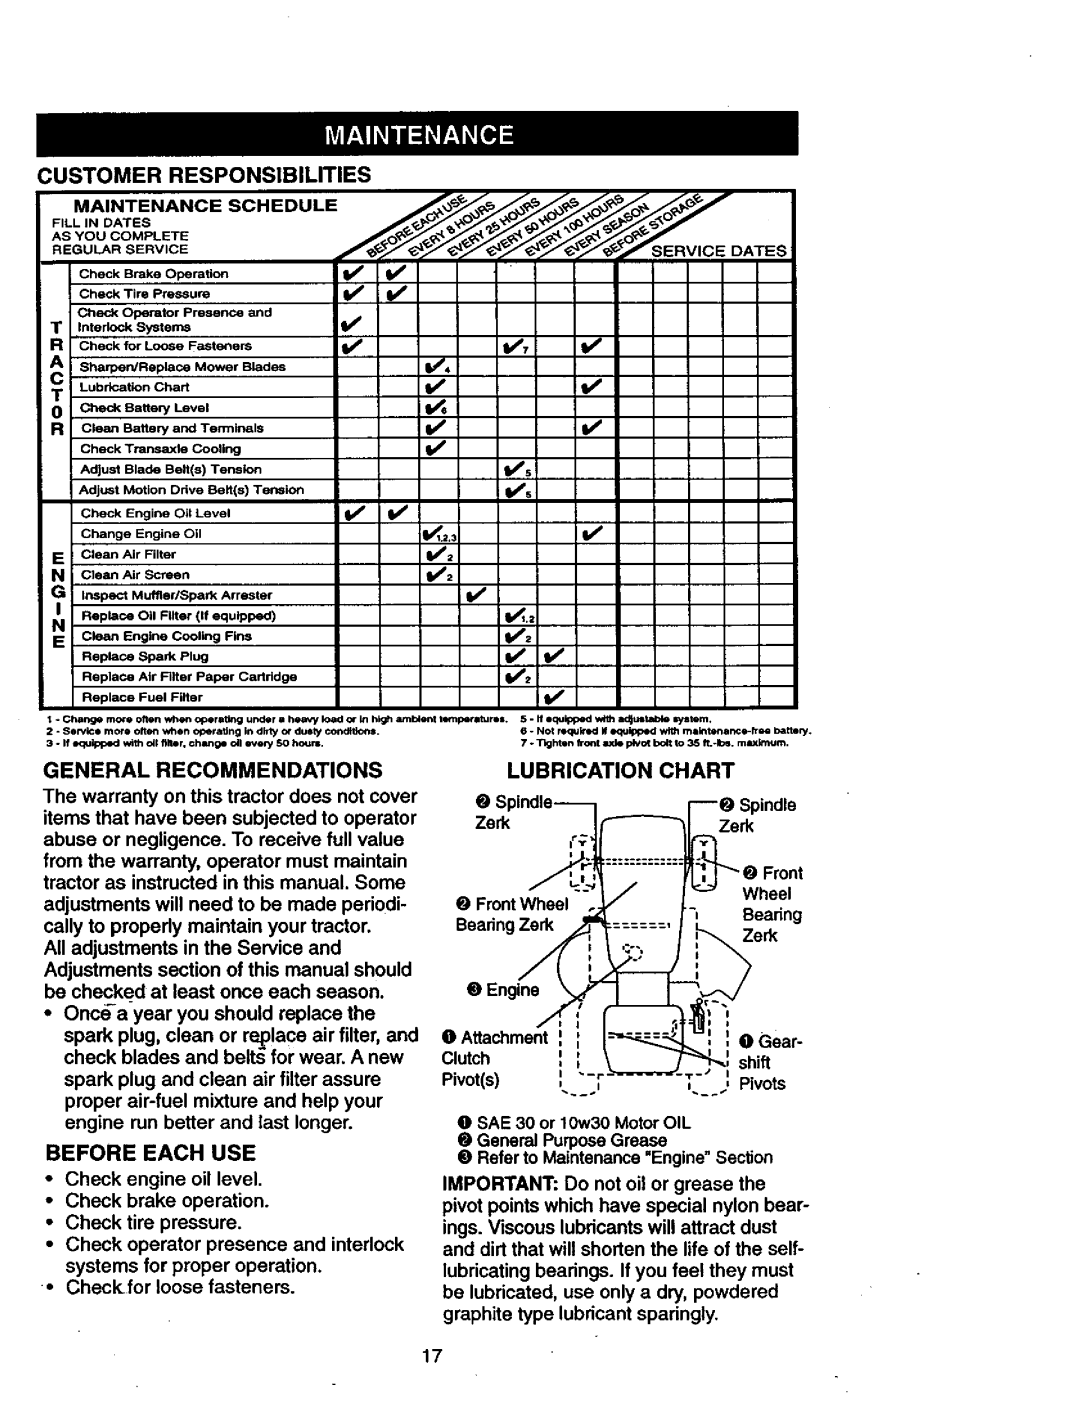 Craftsman 917.27077 Fill,. Oates, Customer Responsibilities, General Recommendations, Before Each Use, Lubrication Chart 